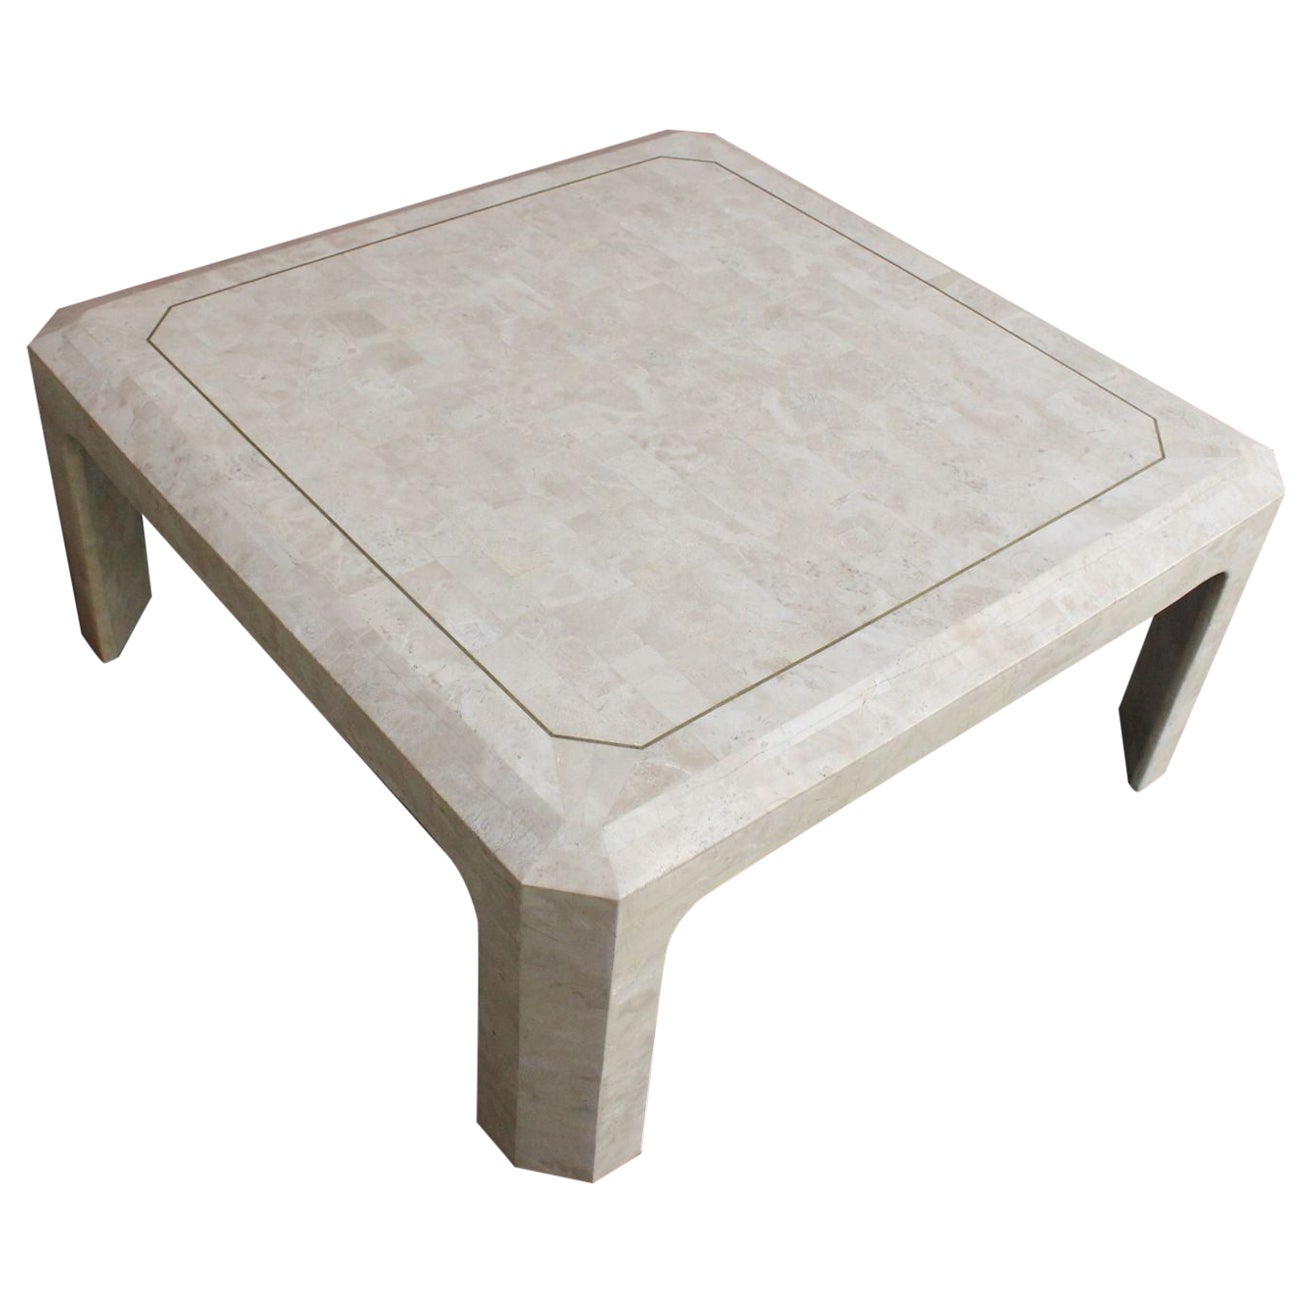 Vintage Maitland Smith Square Coffee Table in Tessellated Stone with Brass Inlay For Sale